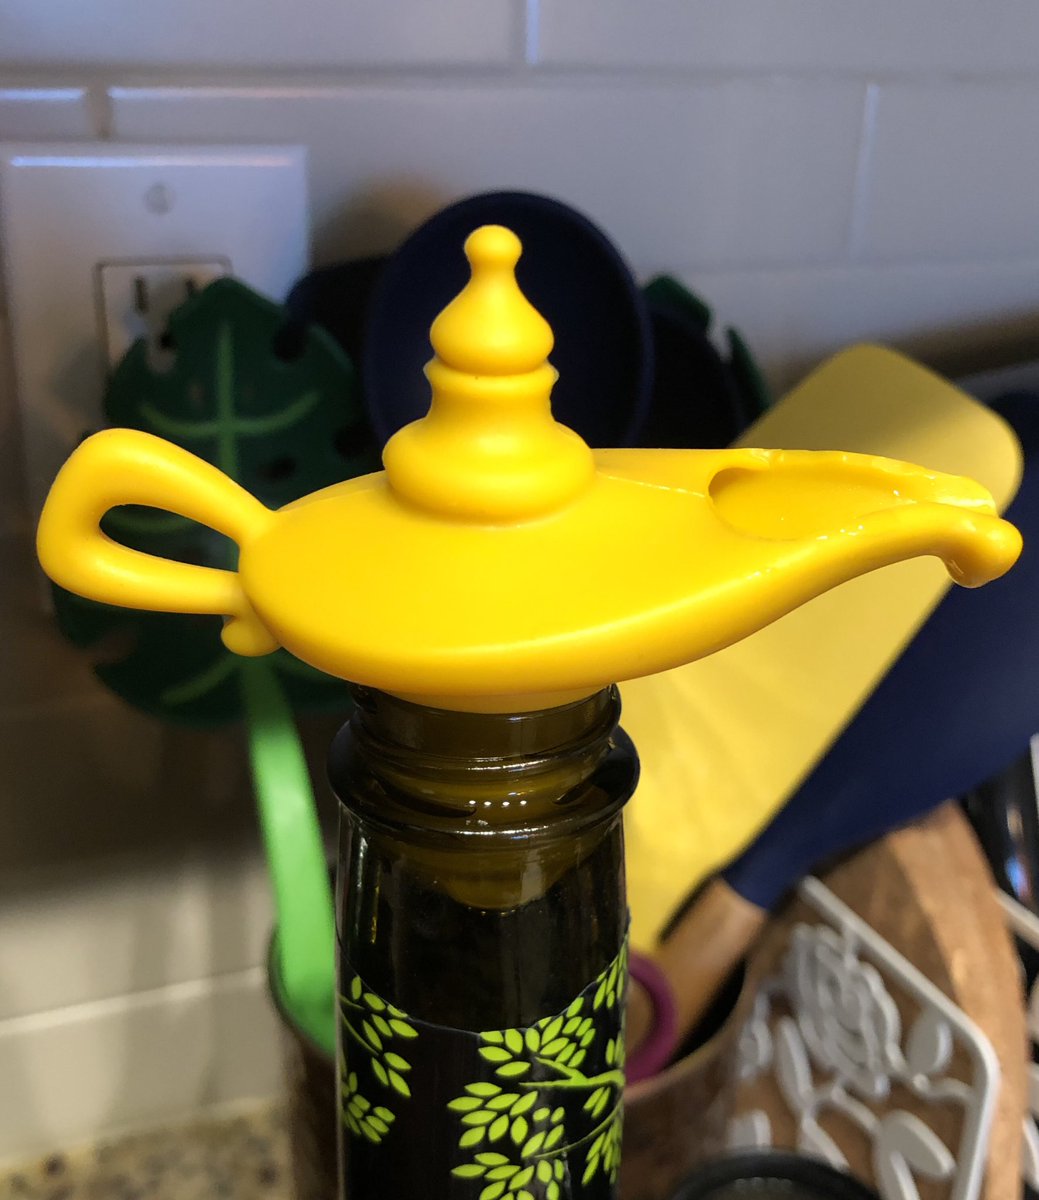 2nd sidenote: my olive oil stopper is an oil lamp and I love it so much. I estimate half of my kitchen utensils are masquerading as something else.